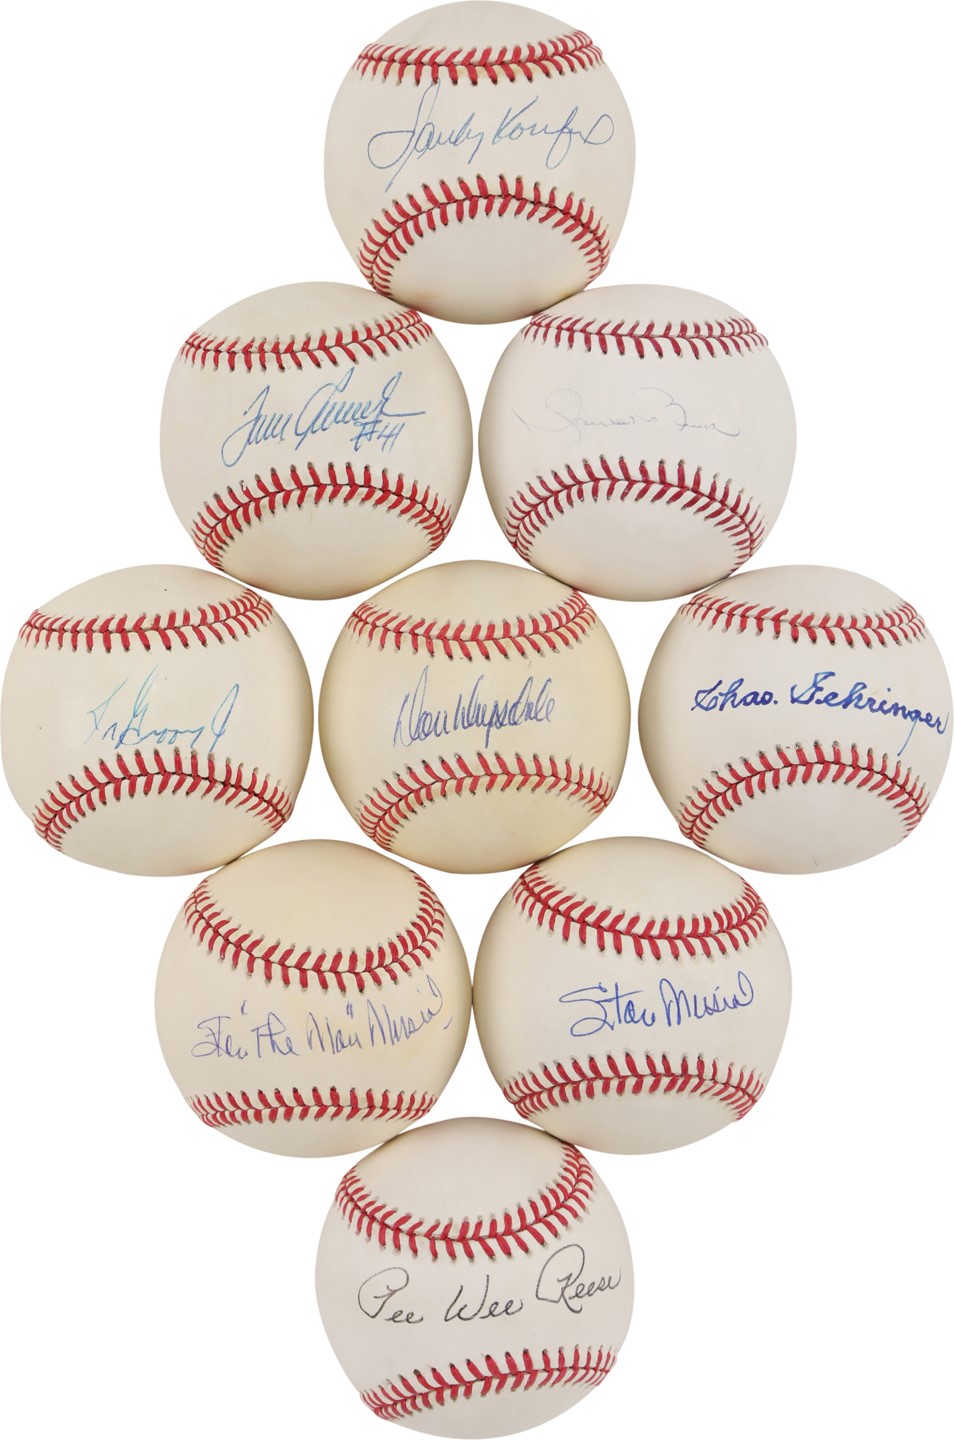 Baseball Autographs - Hall of Famers and Stars Signed Baseball Collection - Most JSA Certified (46)